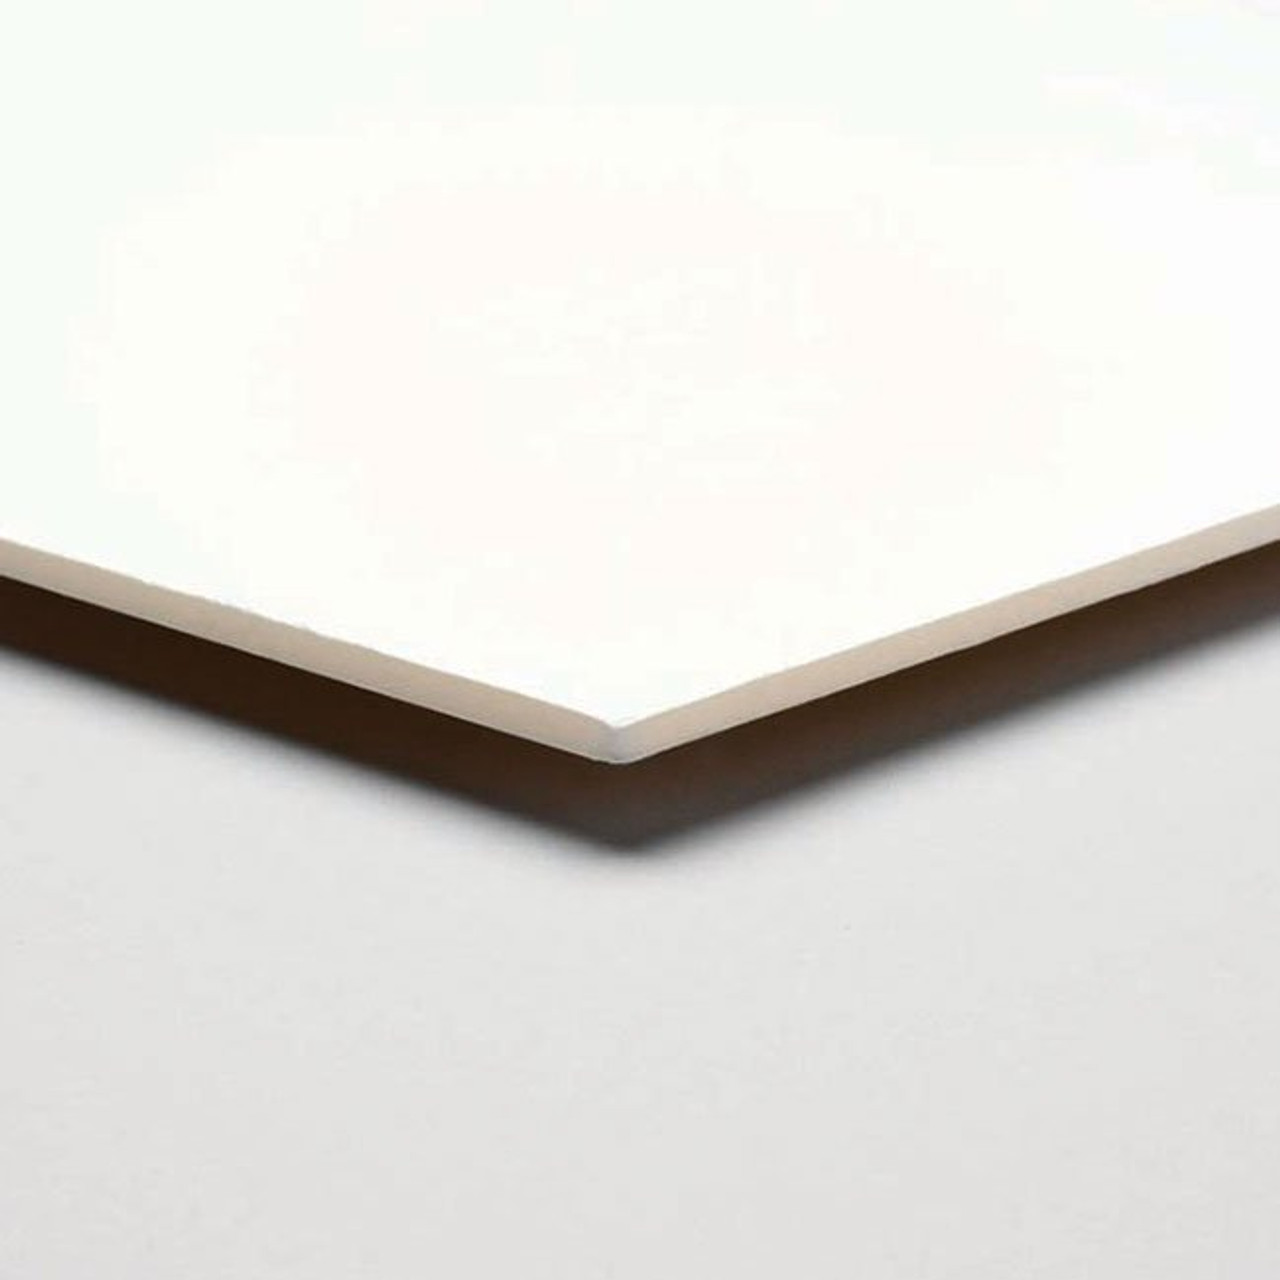 Foam Board - Arts & Crafts - Our Products